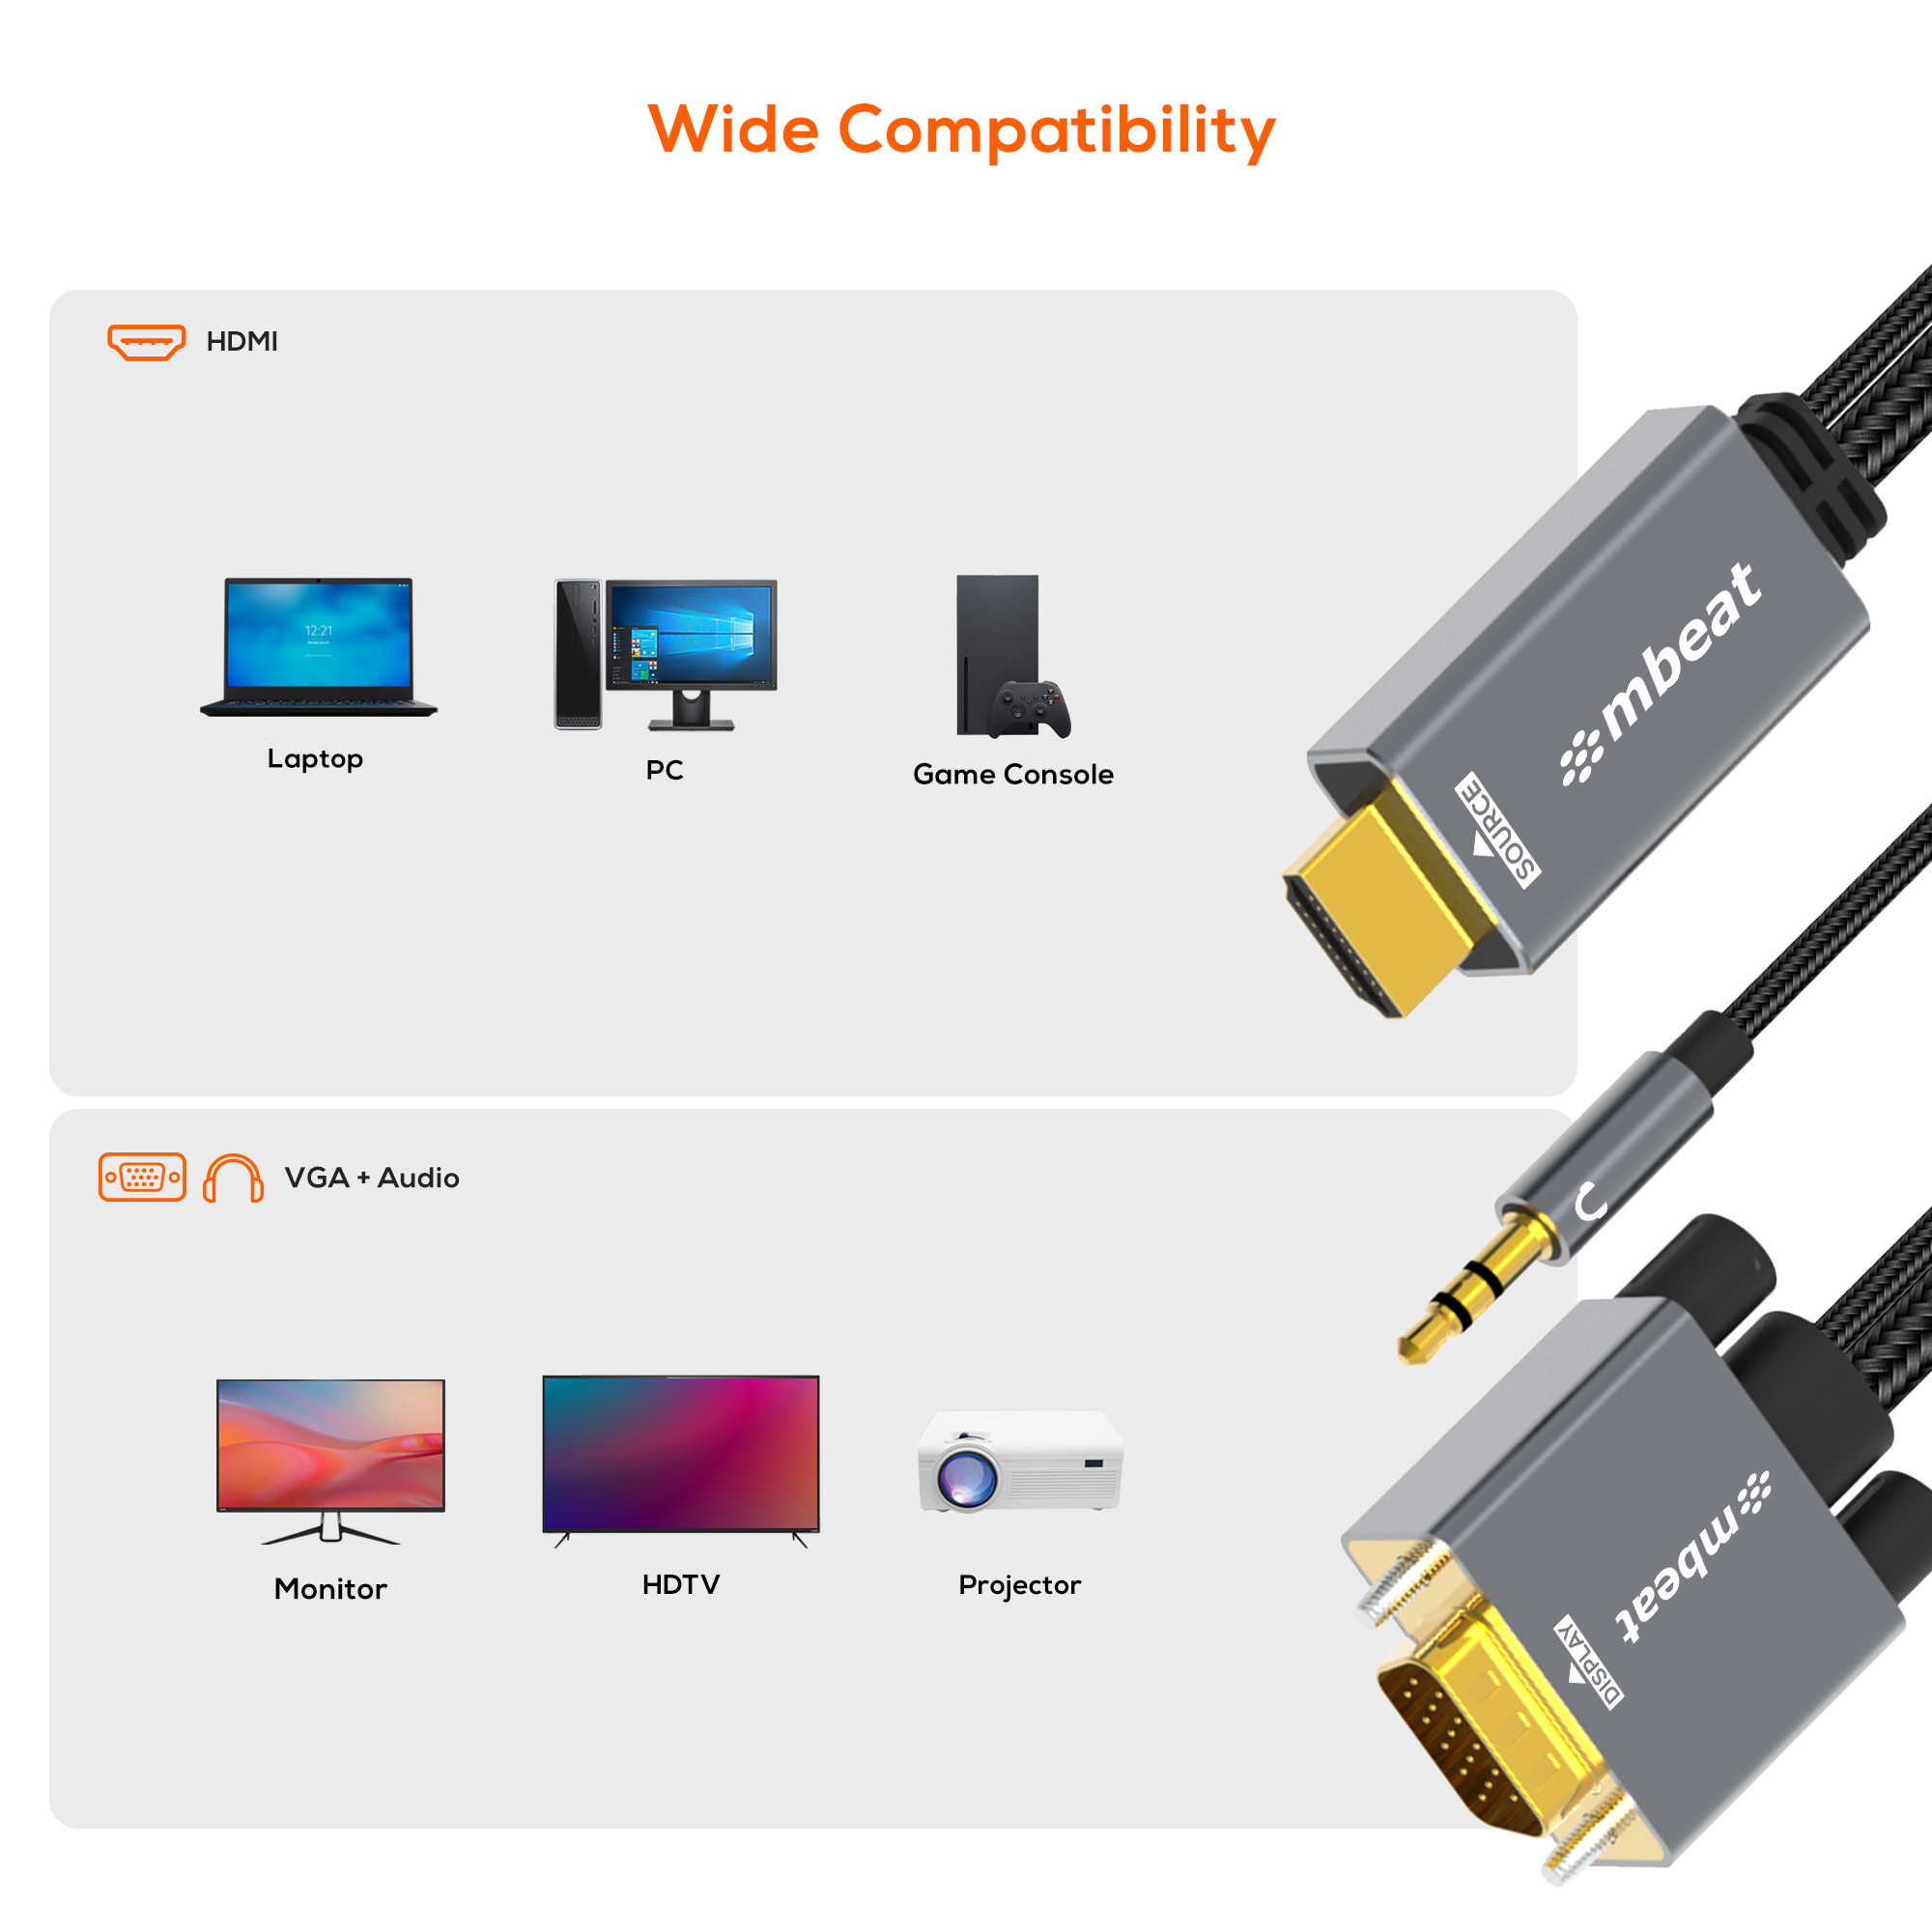 A large marketing image providing additional information about the product mbeat Tough Link HDMI to VGA Cable with USB Power & 3.5mm Audio - 1.8m  - Additional alt info not provided